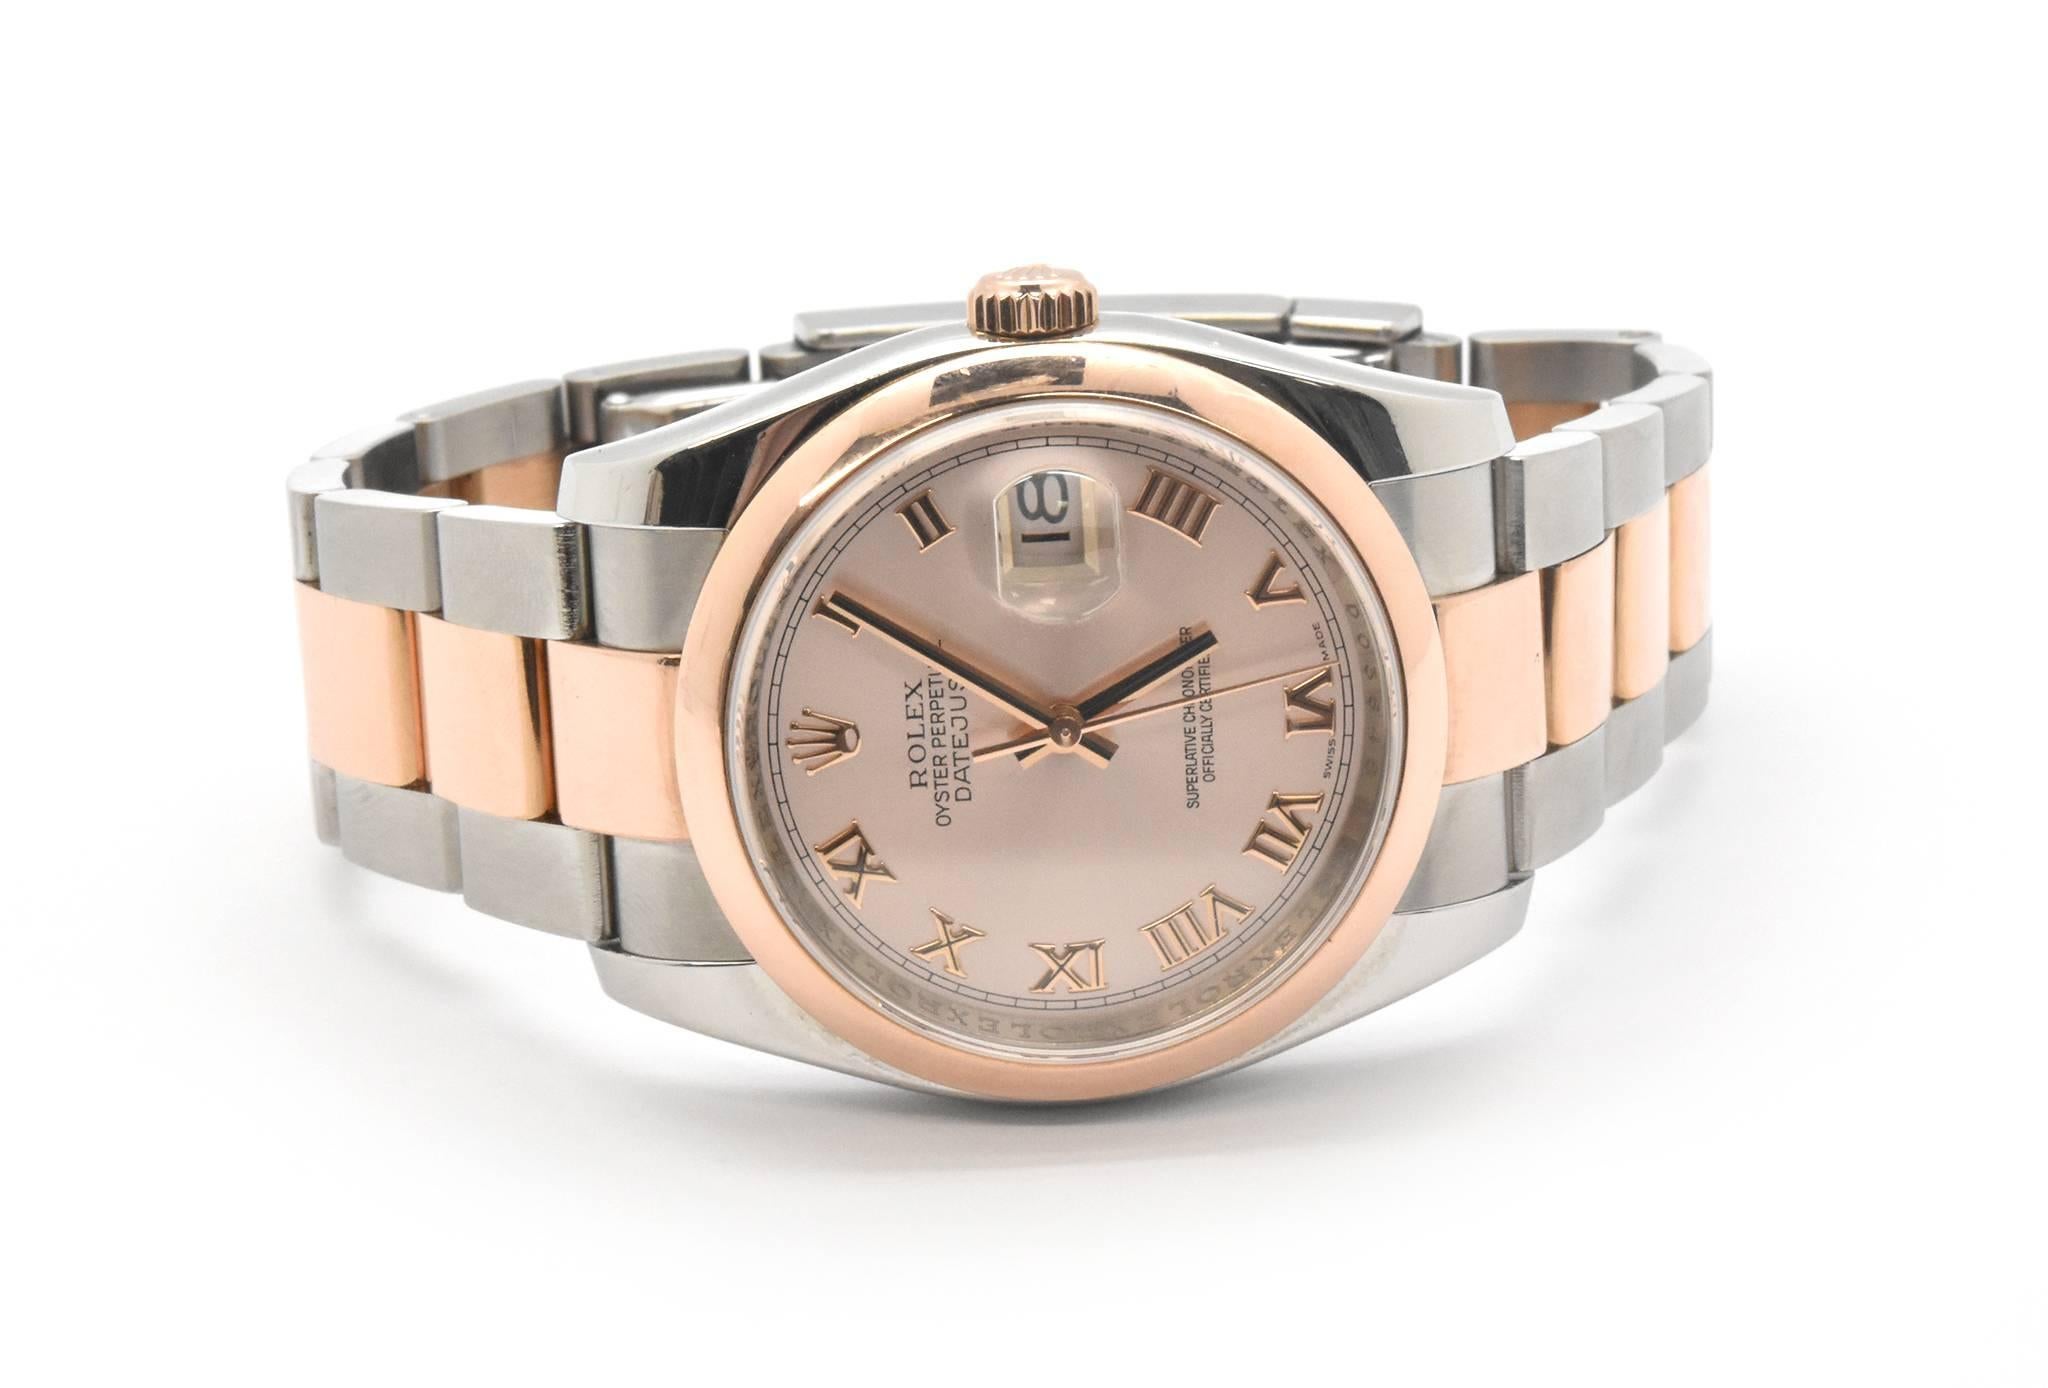 Movement: automatic
Function: hours, minutes, seconds, date
Case: 36mm stainless steel round case, sapphire crystal, screw-down crown, water resistant to 300 meters, 18k rose gold smooth bezel
Band: stainless steel and rose gold bracelet, folding